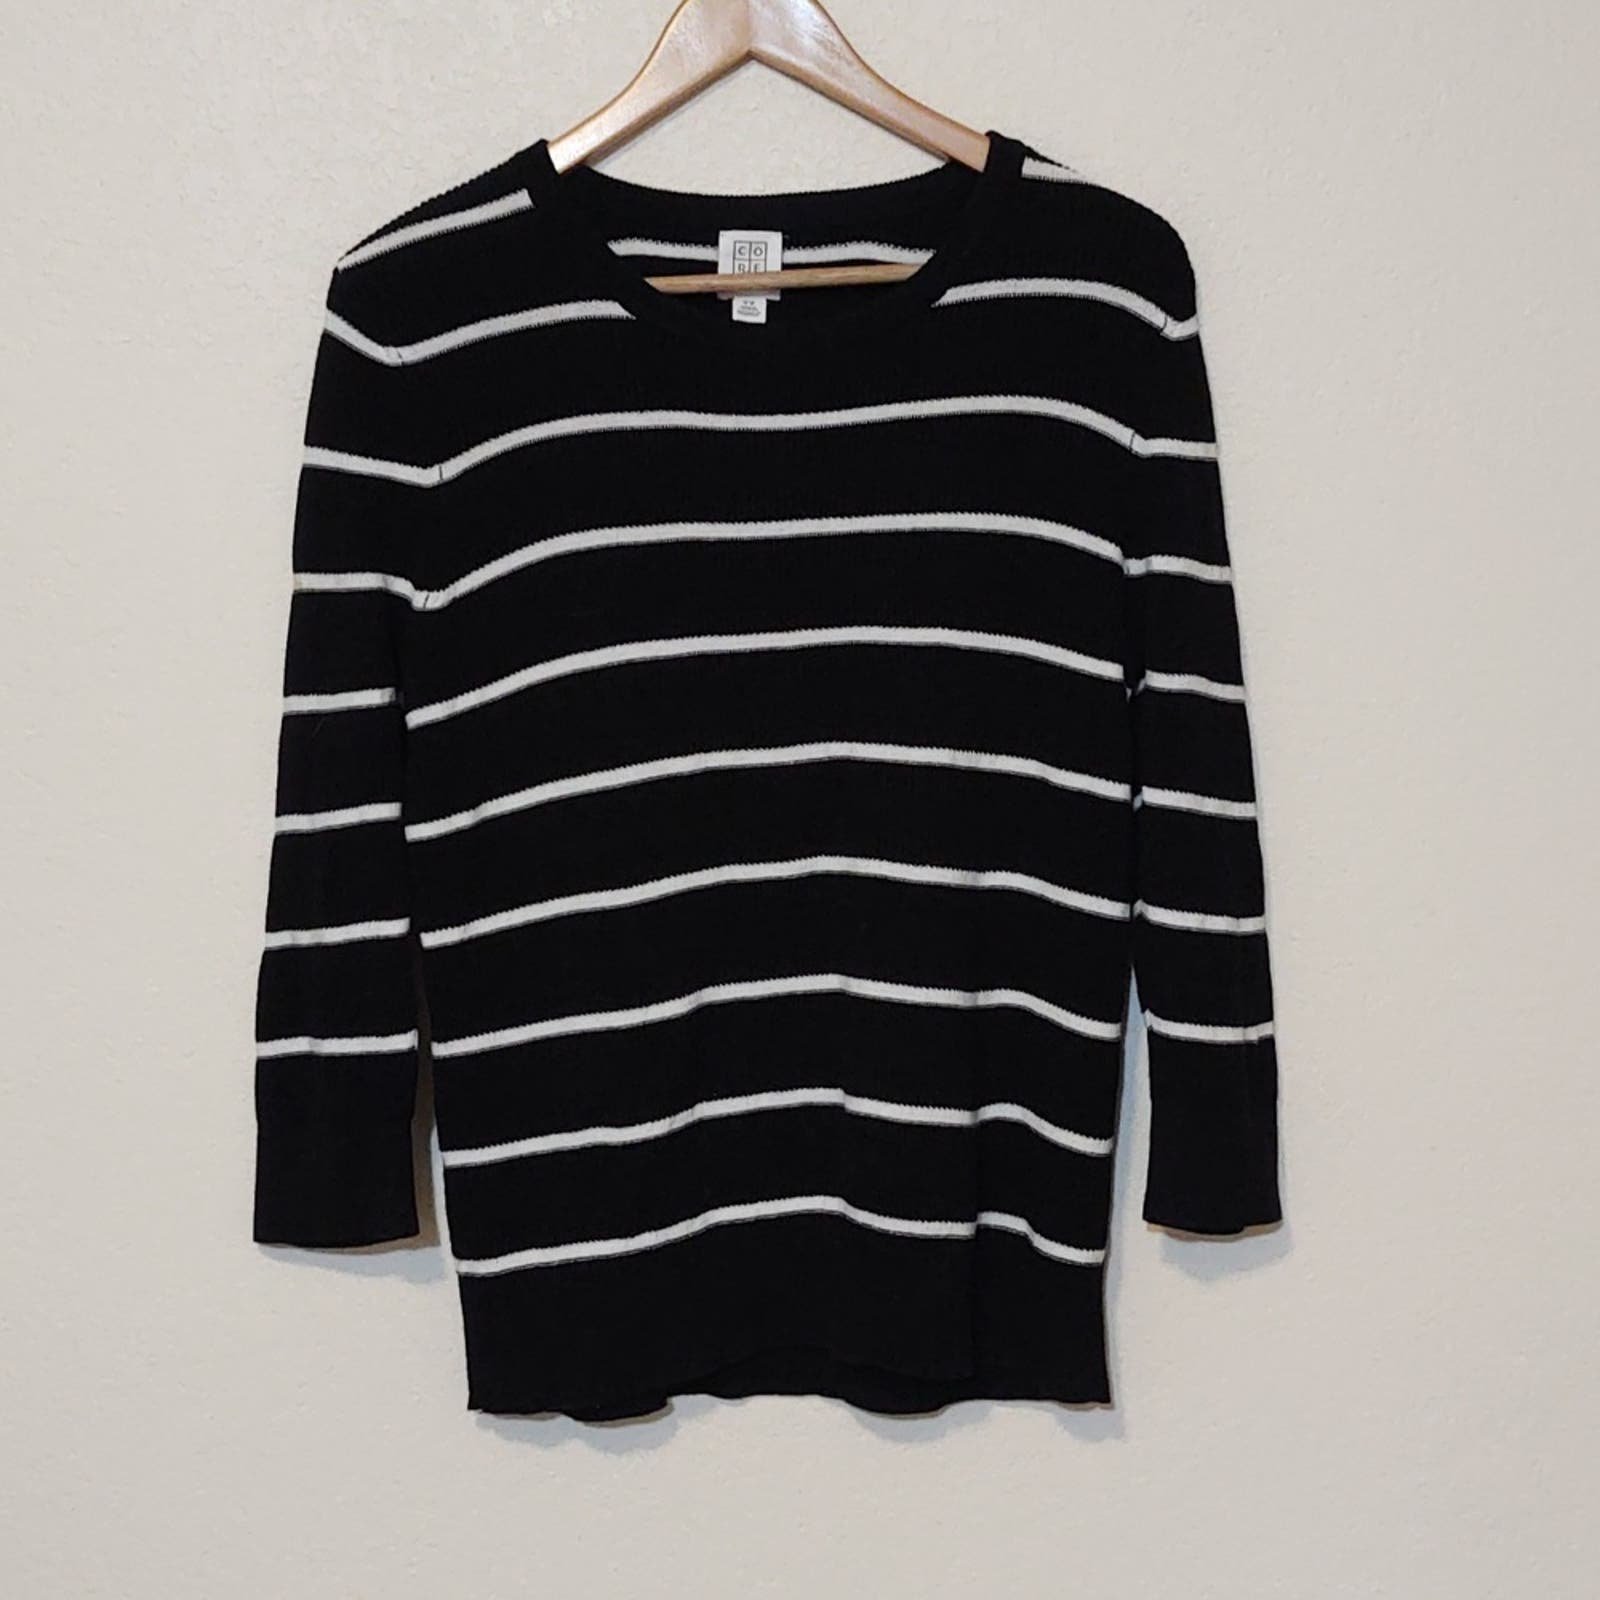 High quality CORE life striped black and white sweater 